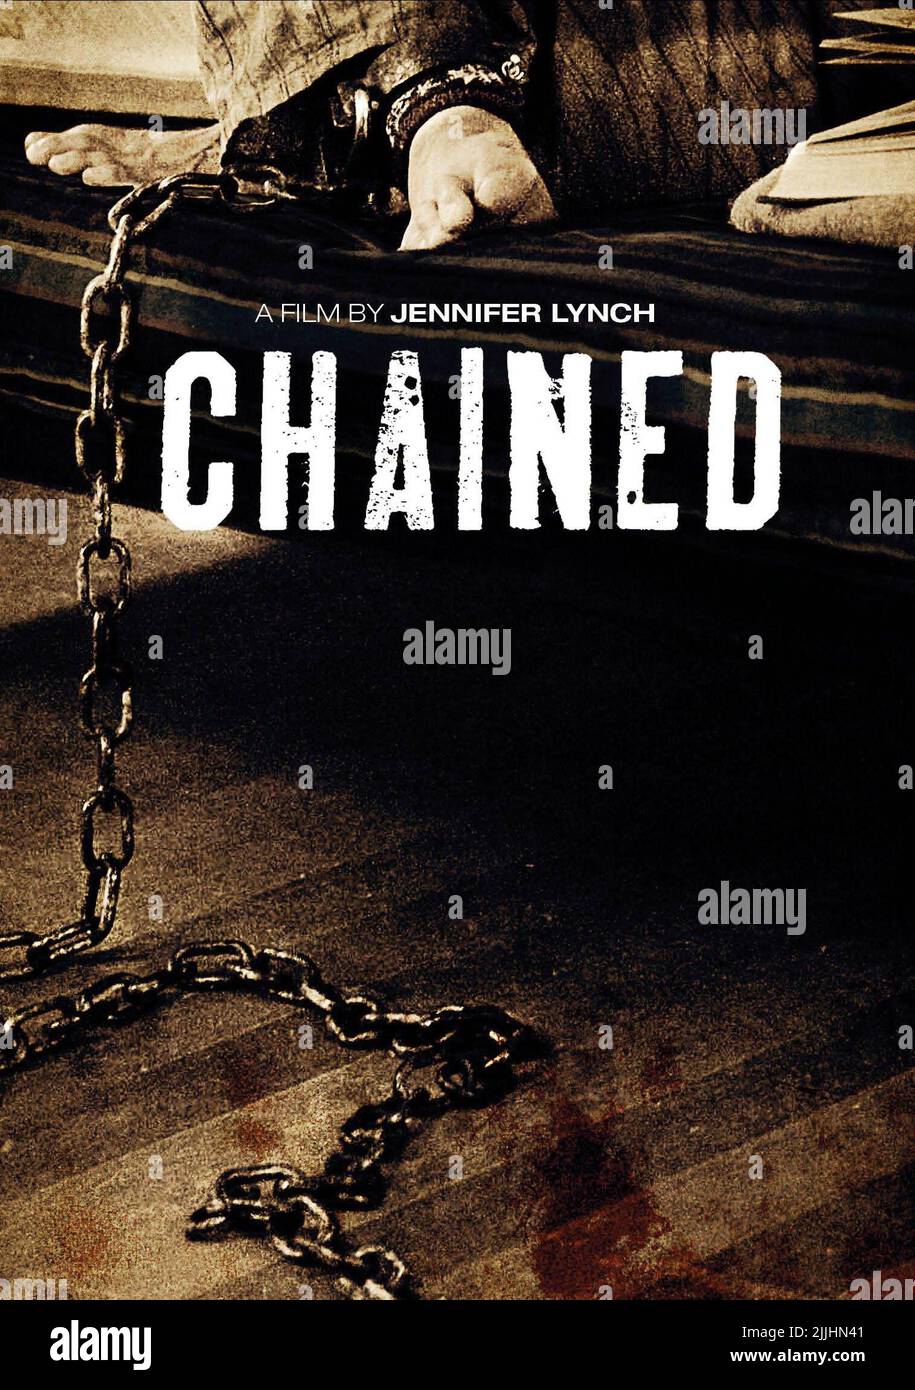 MOVIE POSTER, CHAINED, 2012 Stock Photo